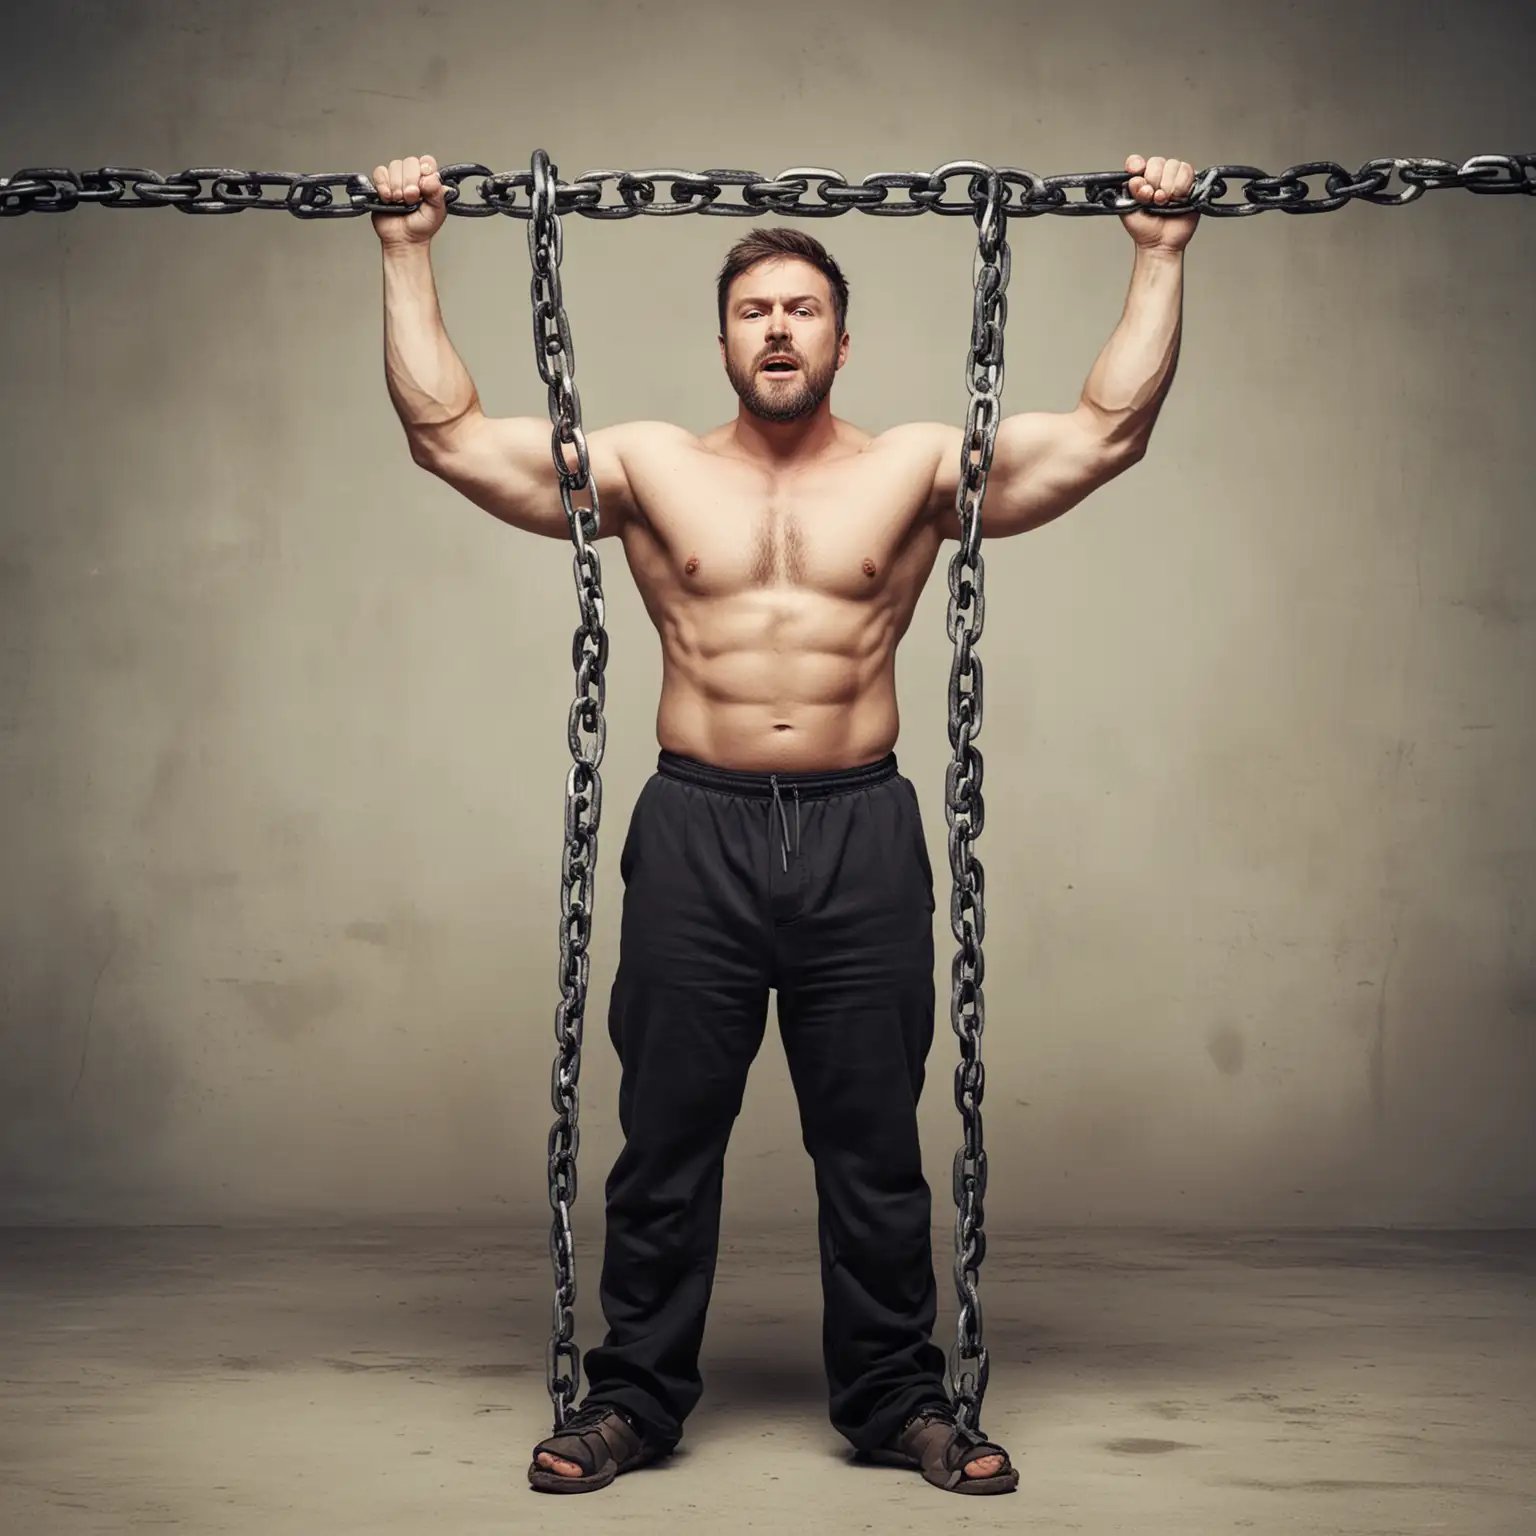  a men in chain getting weight down
